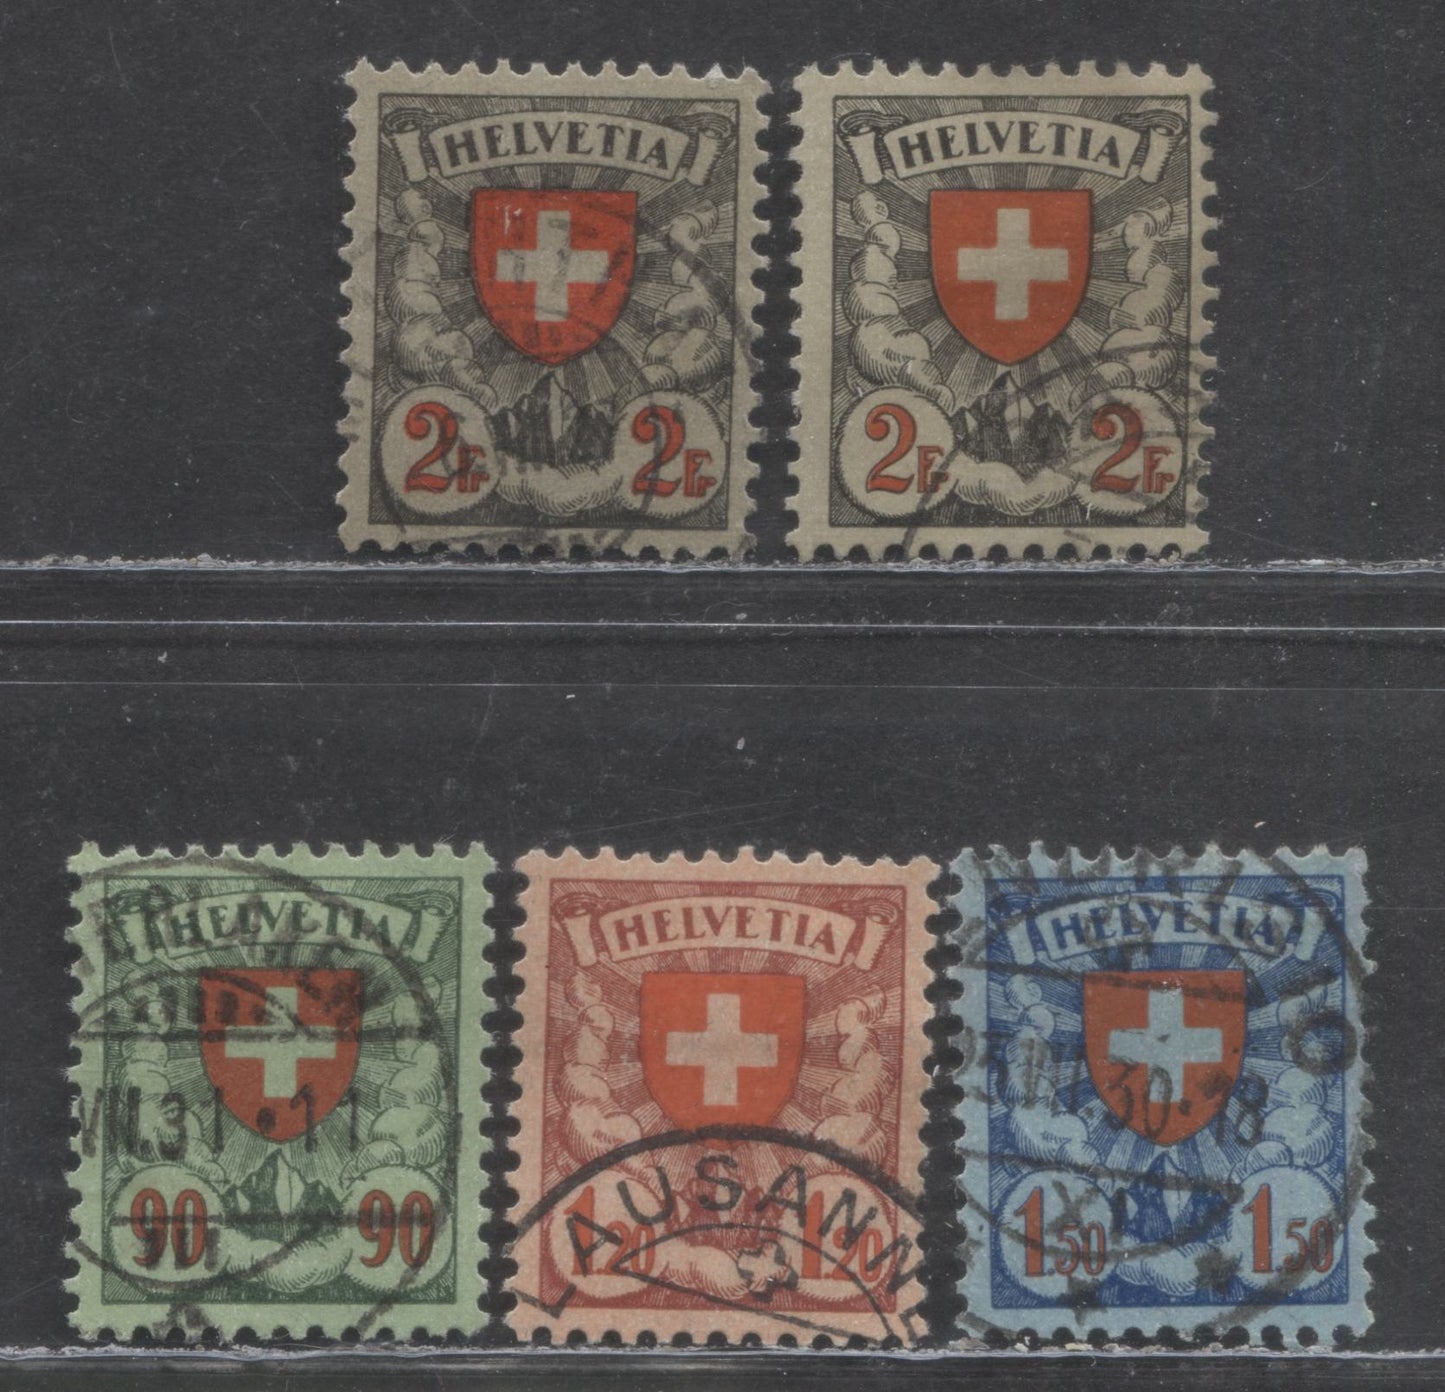 Lot 293 Switzerland SC#200-203a 1924-1933 Arms Issue, On Granite Paper, 5 Very Fine Used Singles, Click on Listing to See ALL Pictures, 2022 Scott Classic Cat. $44.5 USD